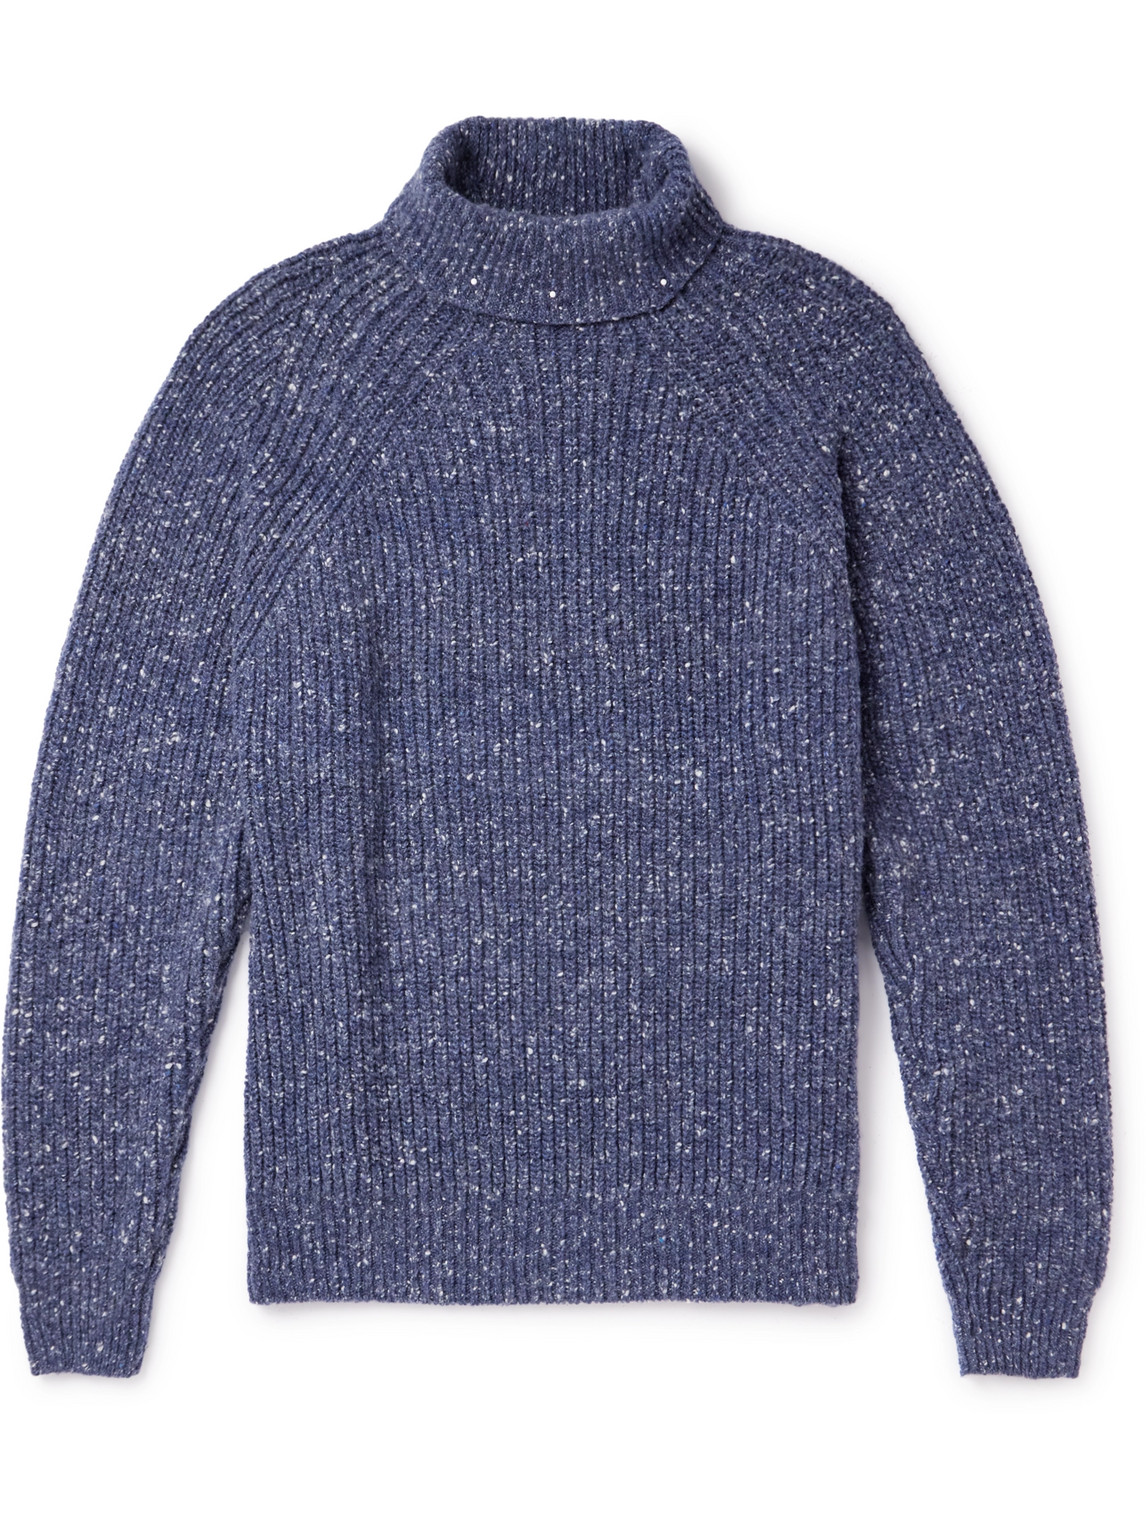 Inis Meain Boatbuilder Ribbed Cashmere Rollneck Sweater In Blue